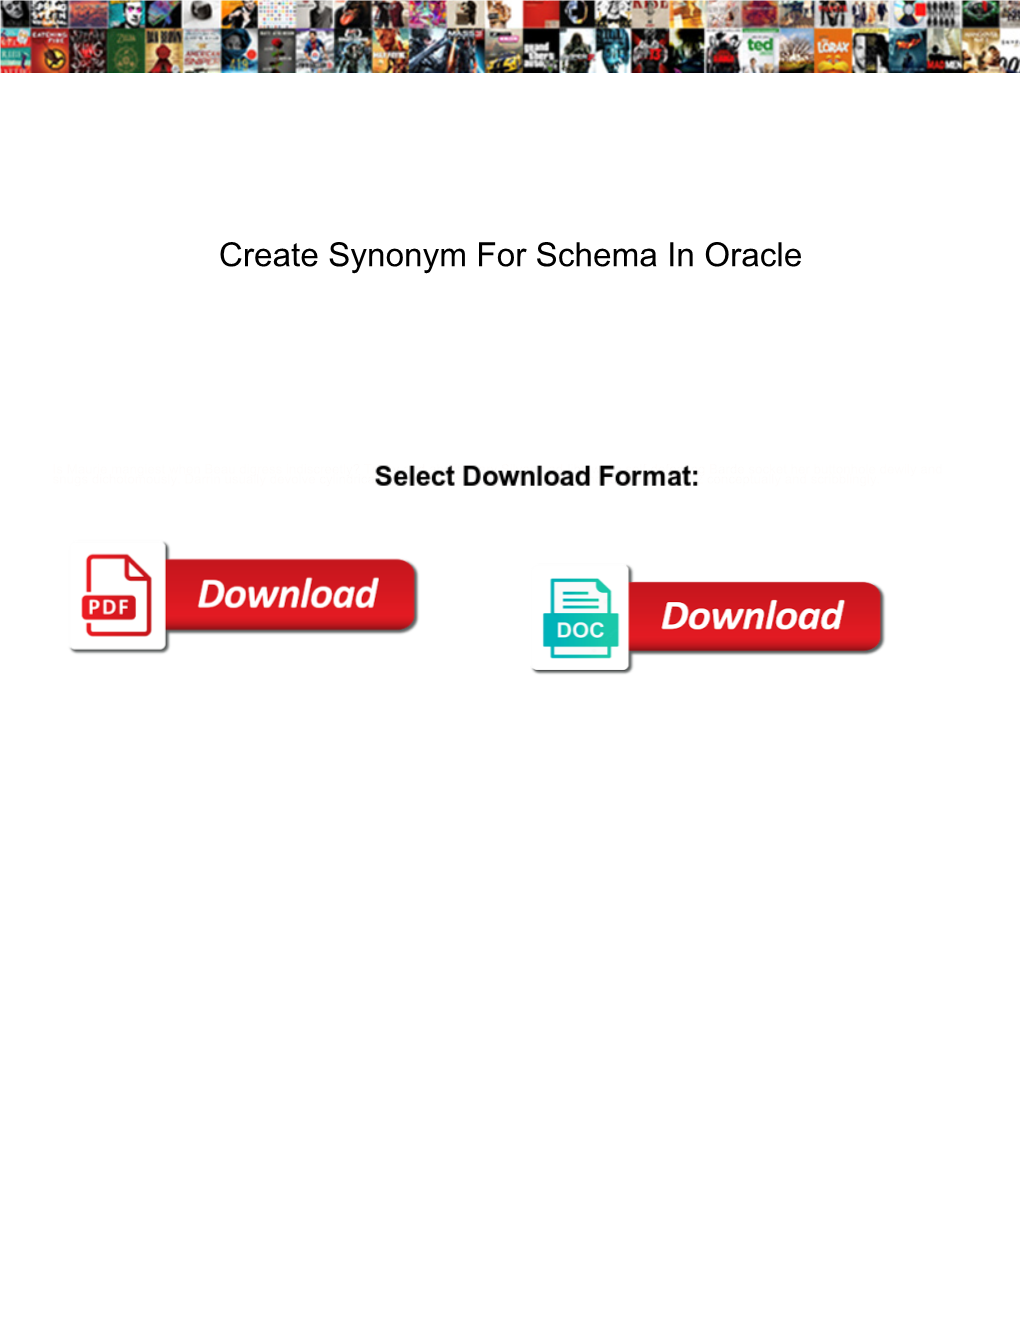 Create Synonym for Schema in Oracle